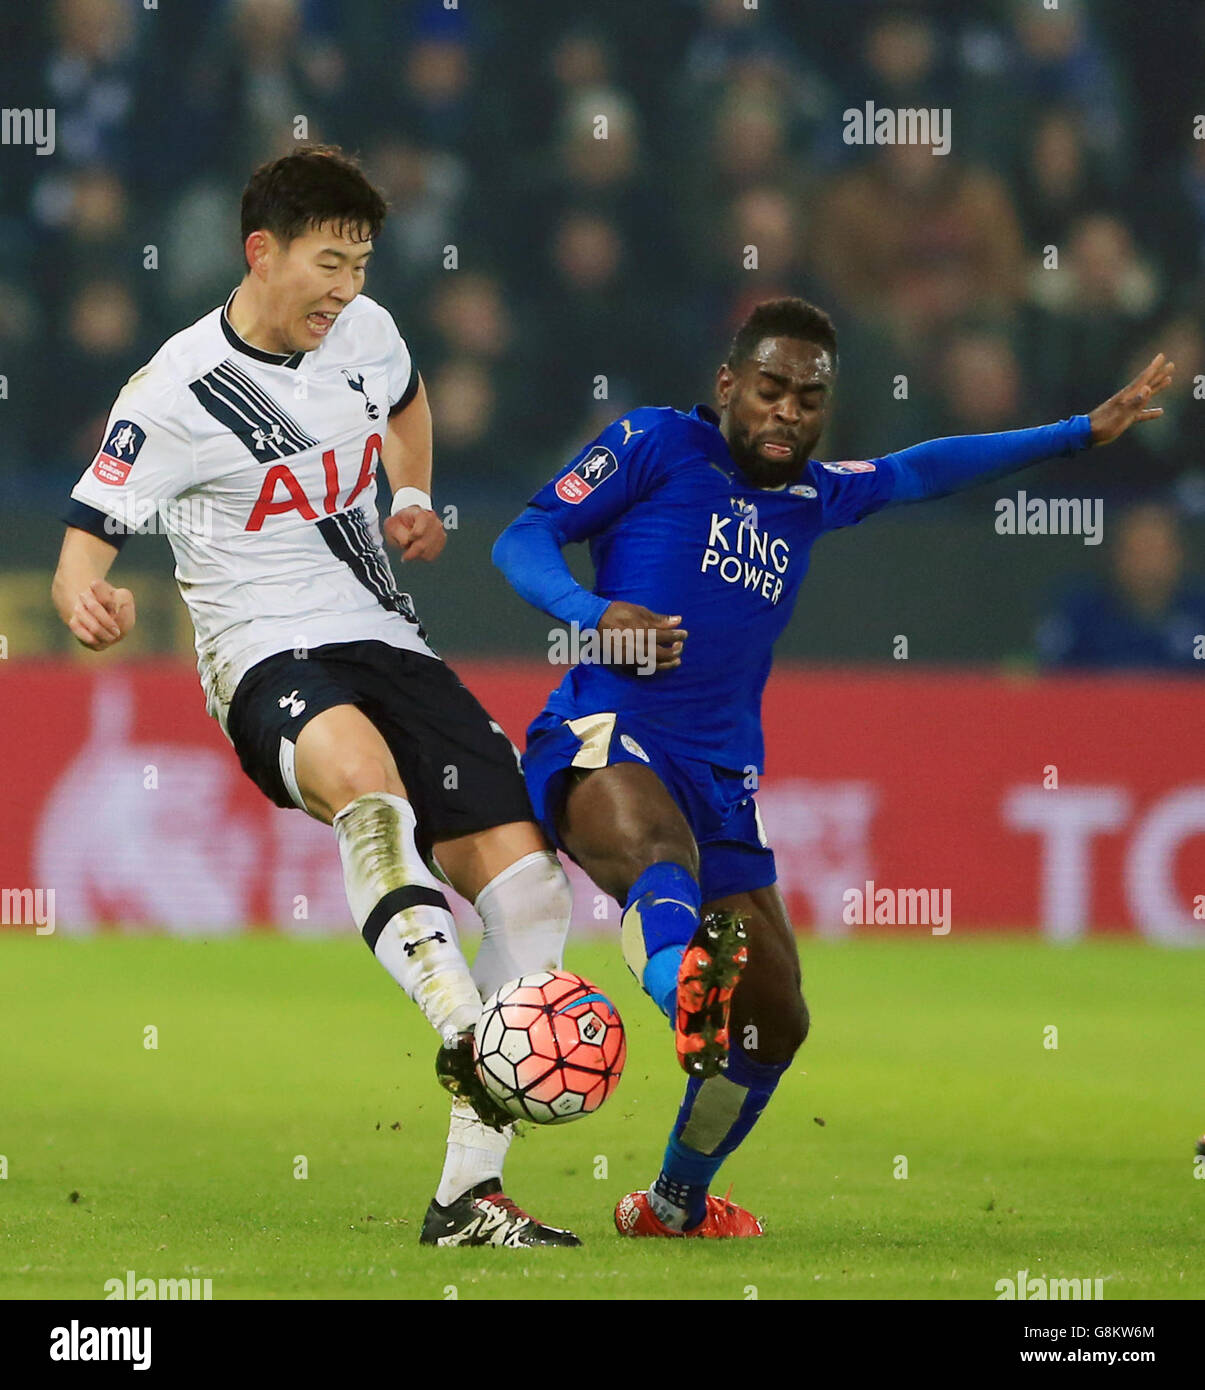 Tottenham Hotspur's Son Heung-Min (left) and Leicester City's Nathan Dyer battle for the ball during the Emirates FA Cup, third round match at the King Power Stadium, Leicester. Stock Photo